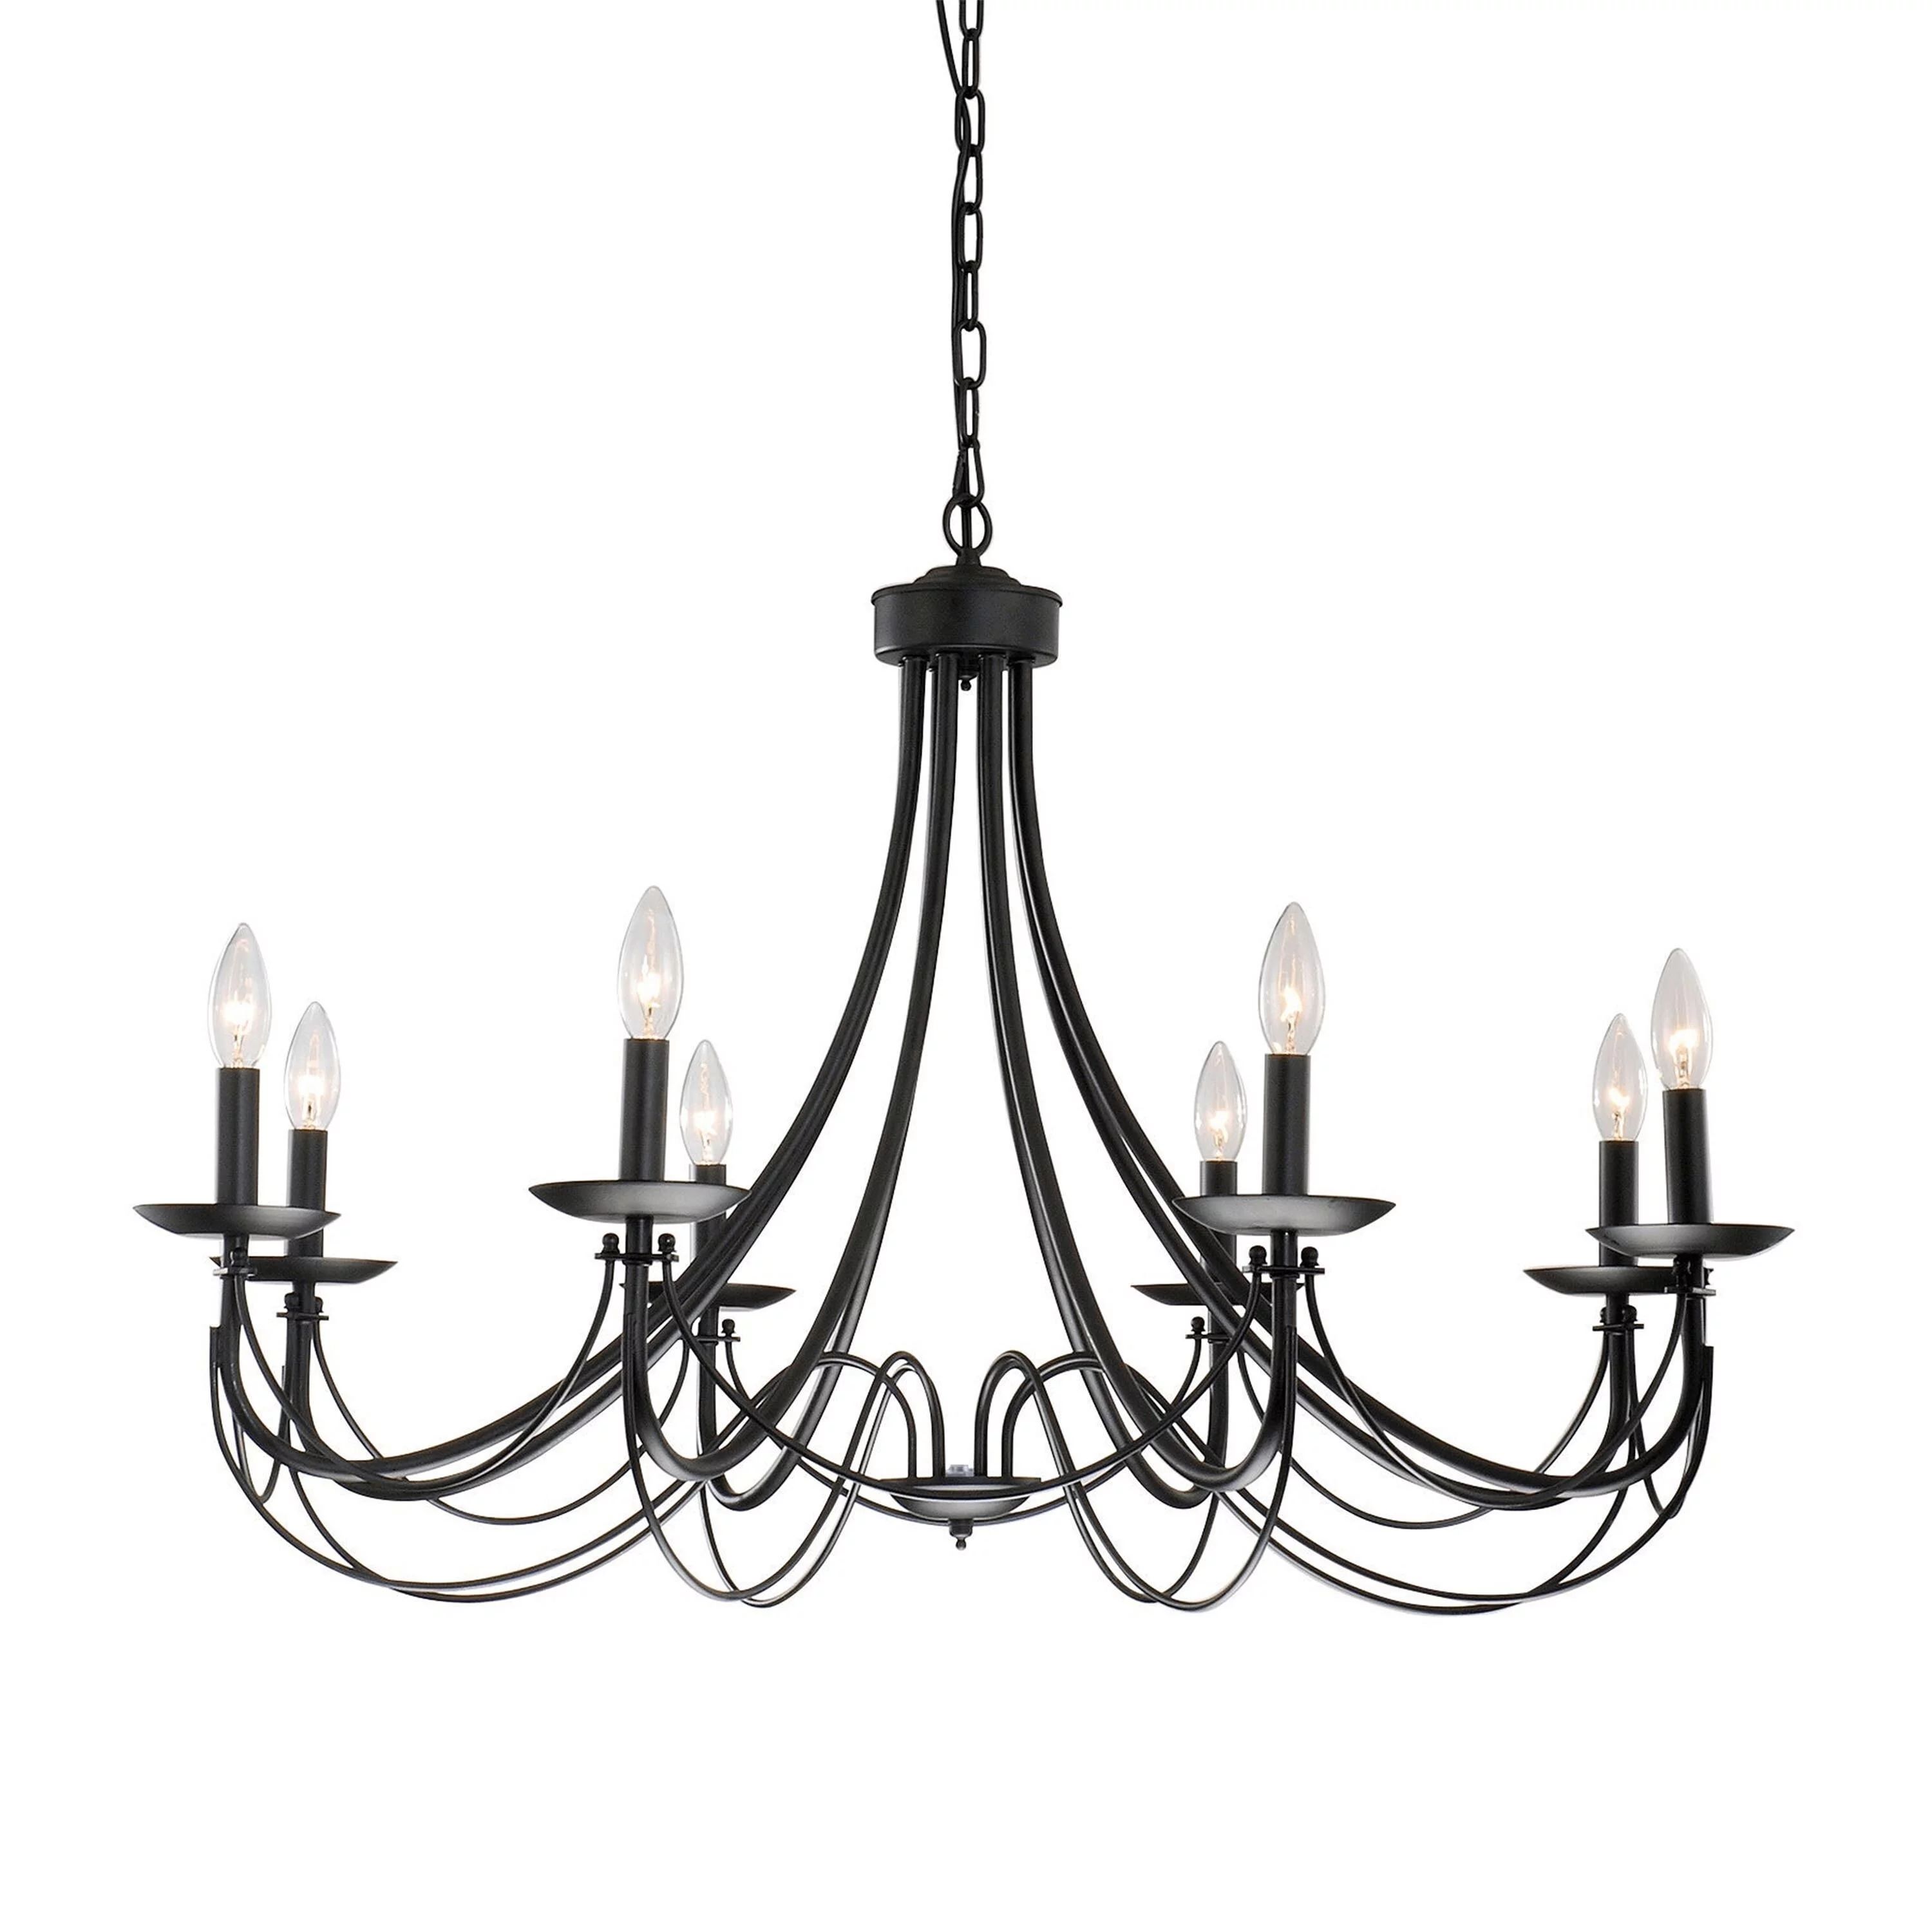 The Lighting Store Micael 8-light Black Iron Chandelier with No Shade | Walmart (US)